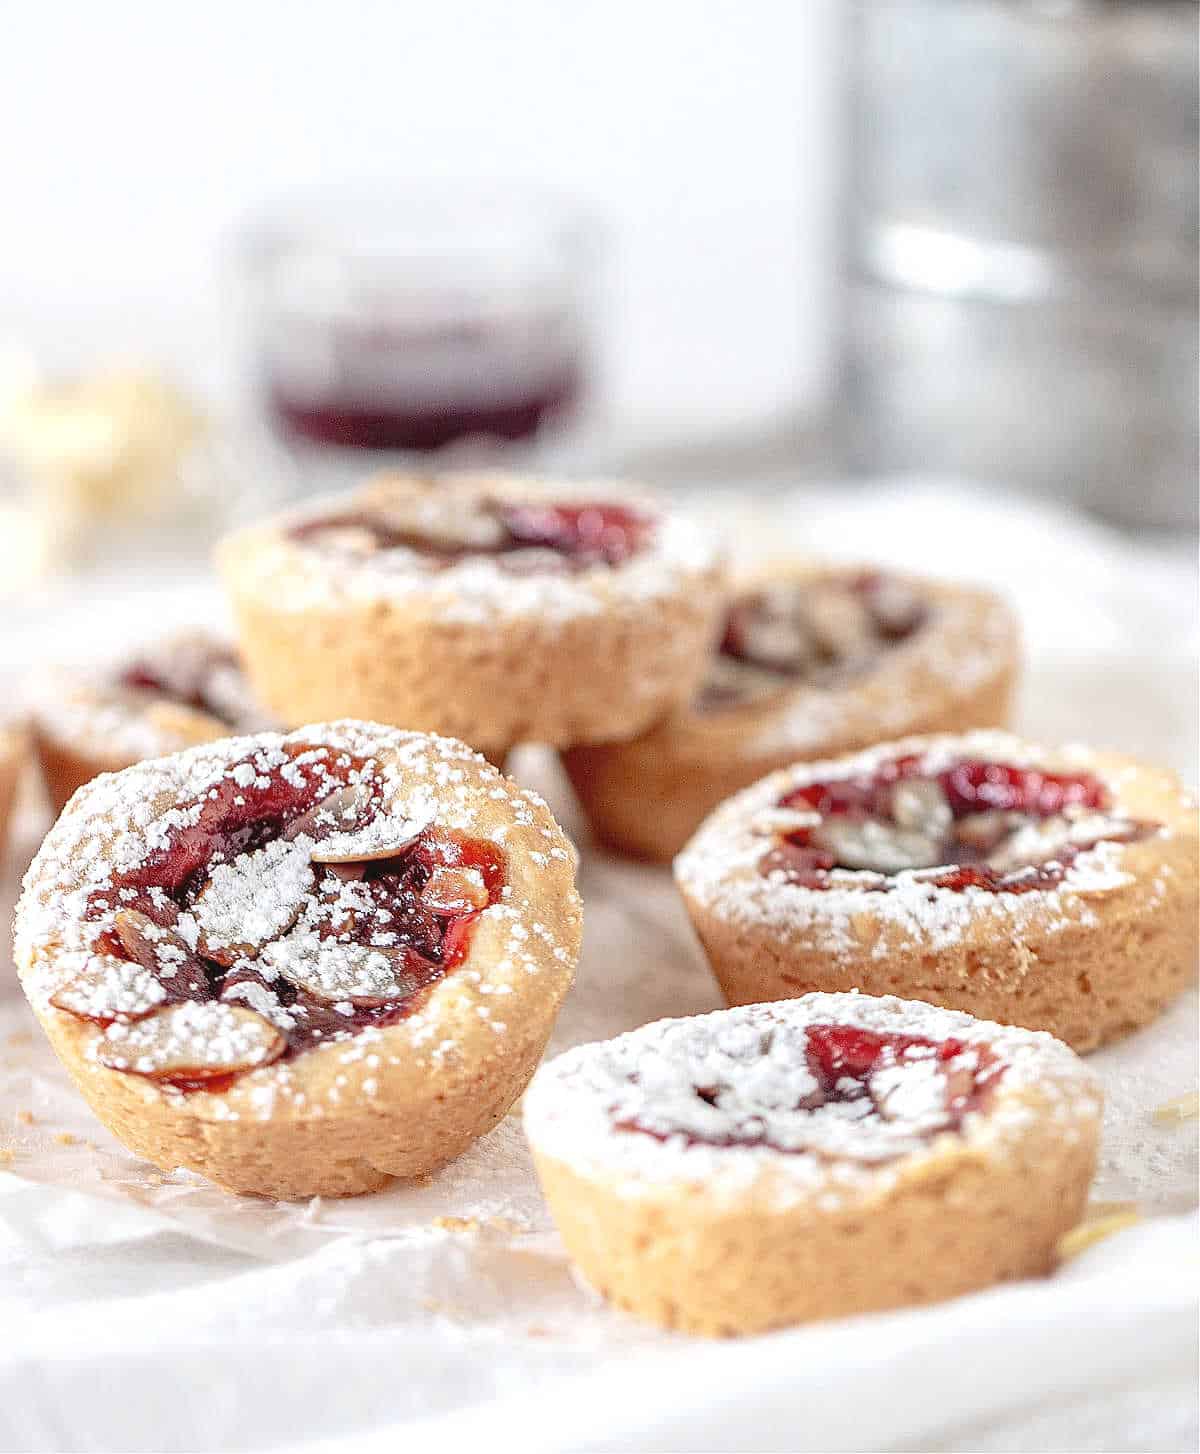 Pile of jam tarts with powdered sugar on a white cloth. Metal sifter and glass in the background.